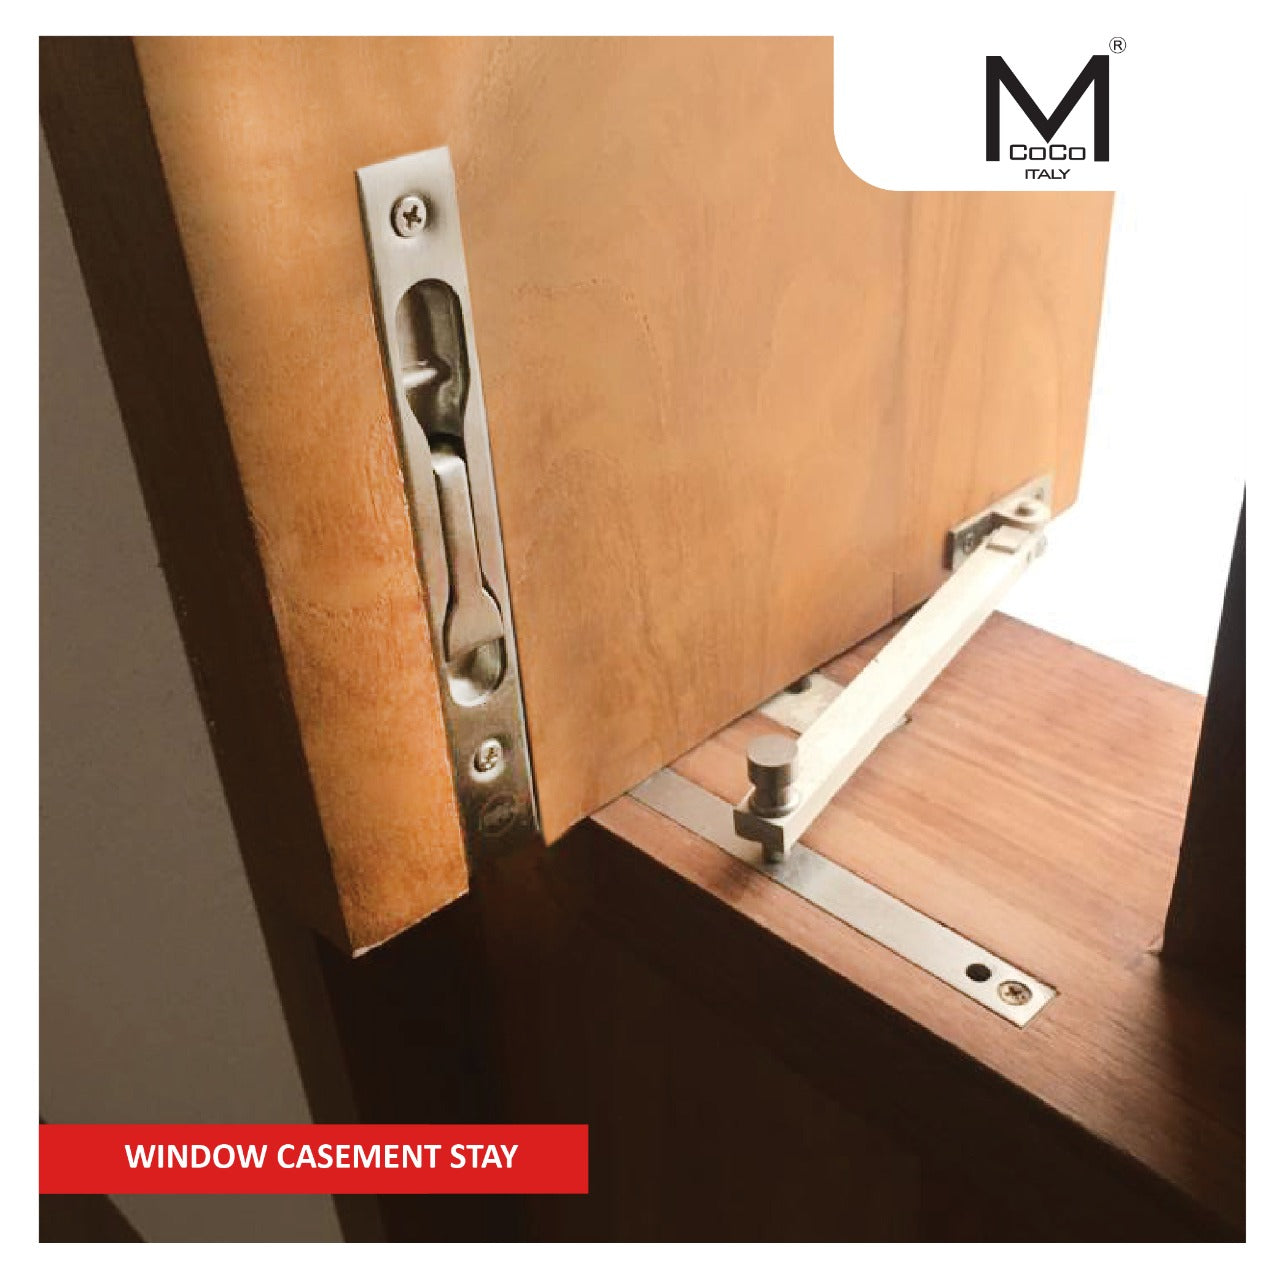 Mcoco Window Casement Stay - Enhance your windows with stylish and secure hardware solutions.